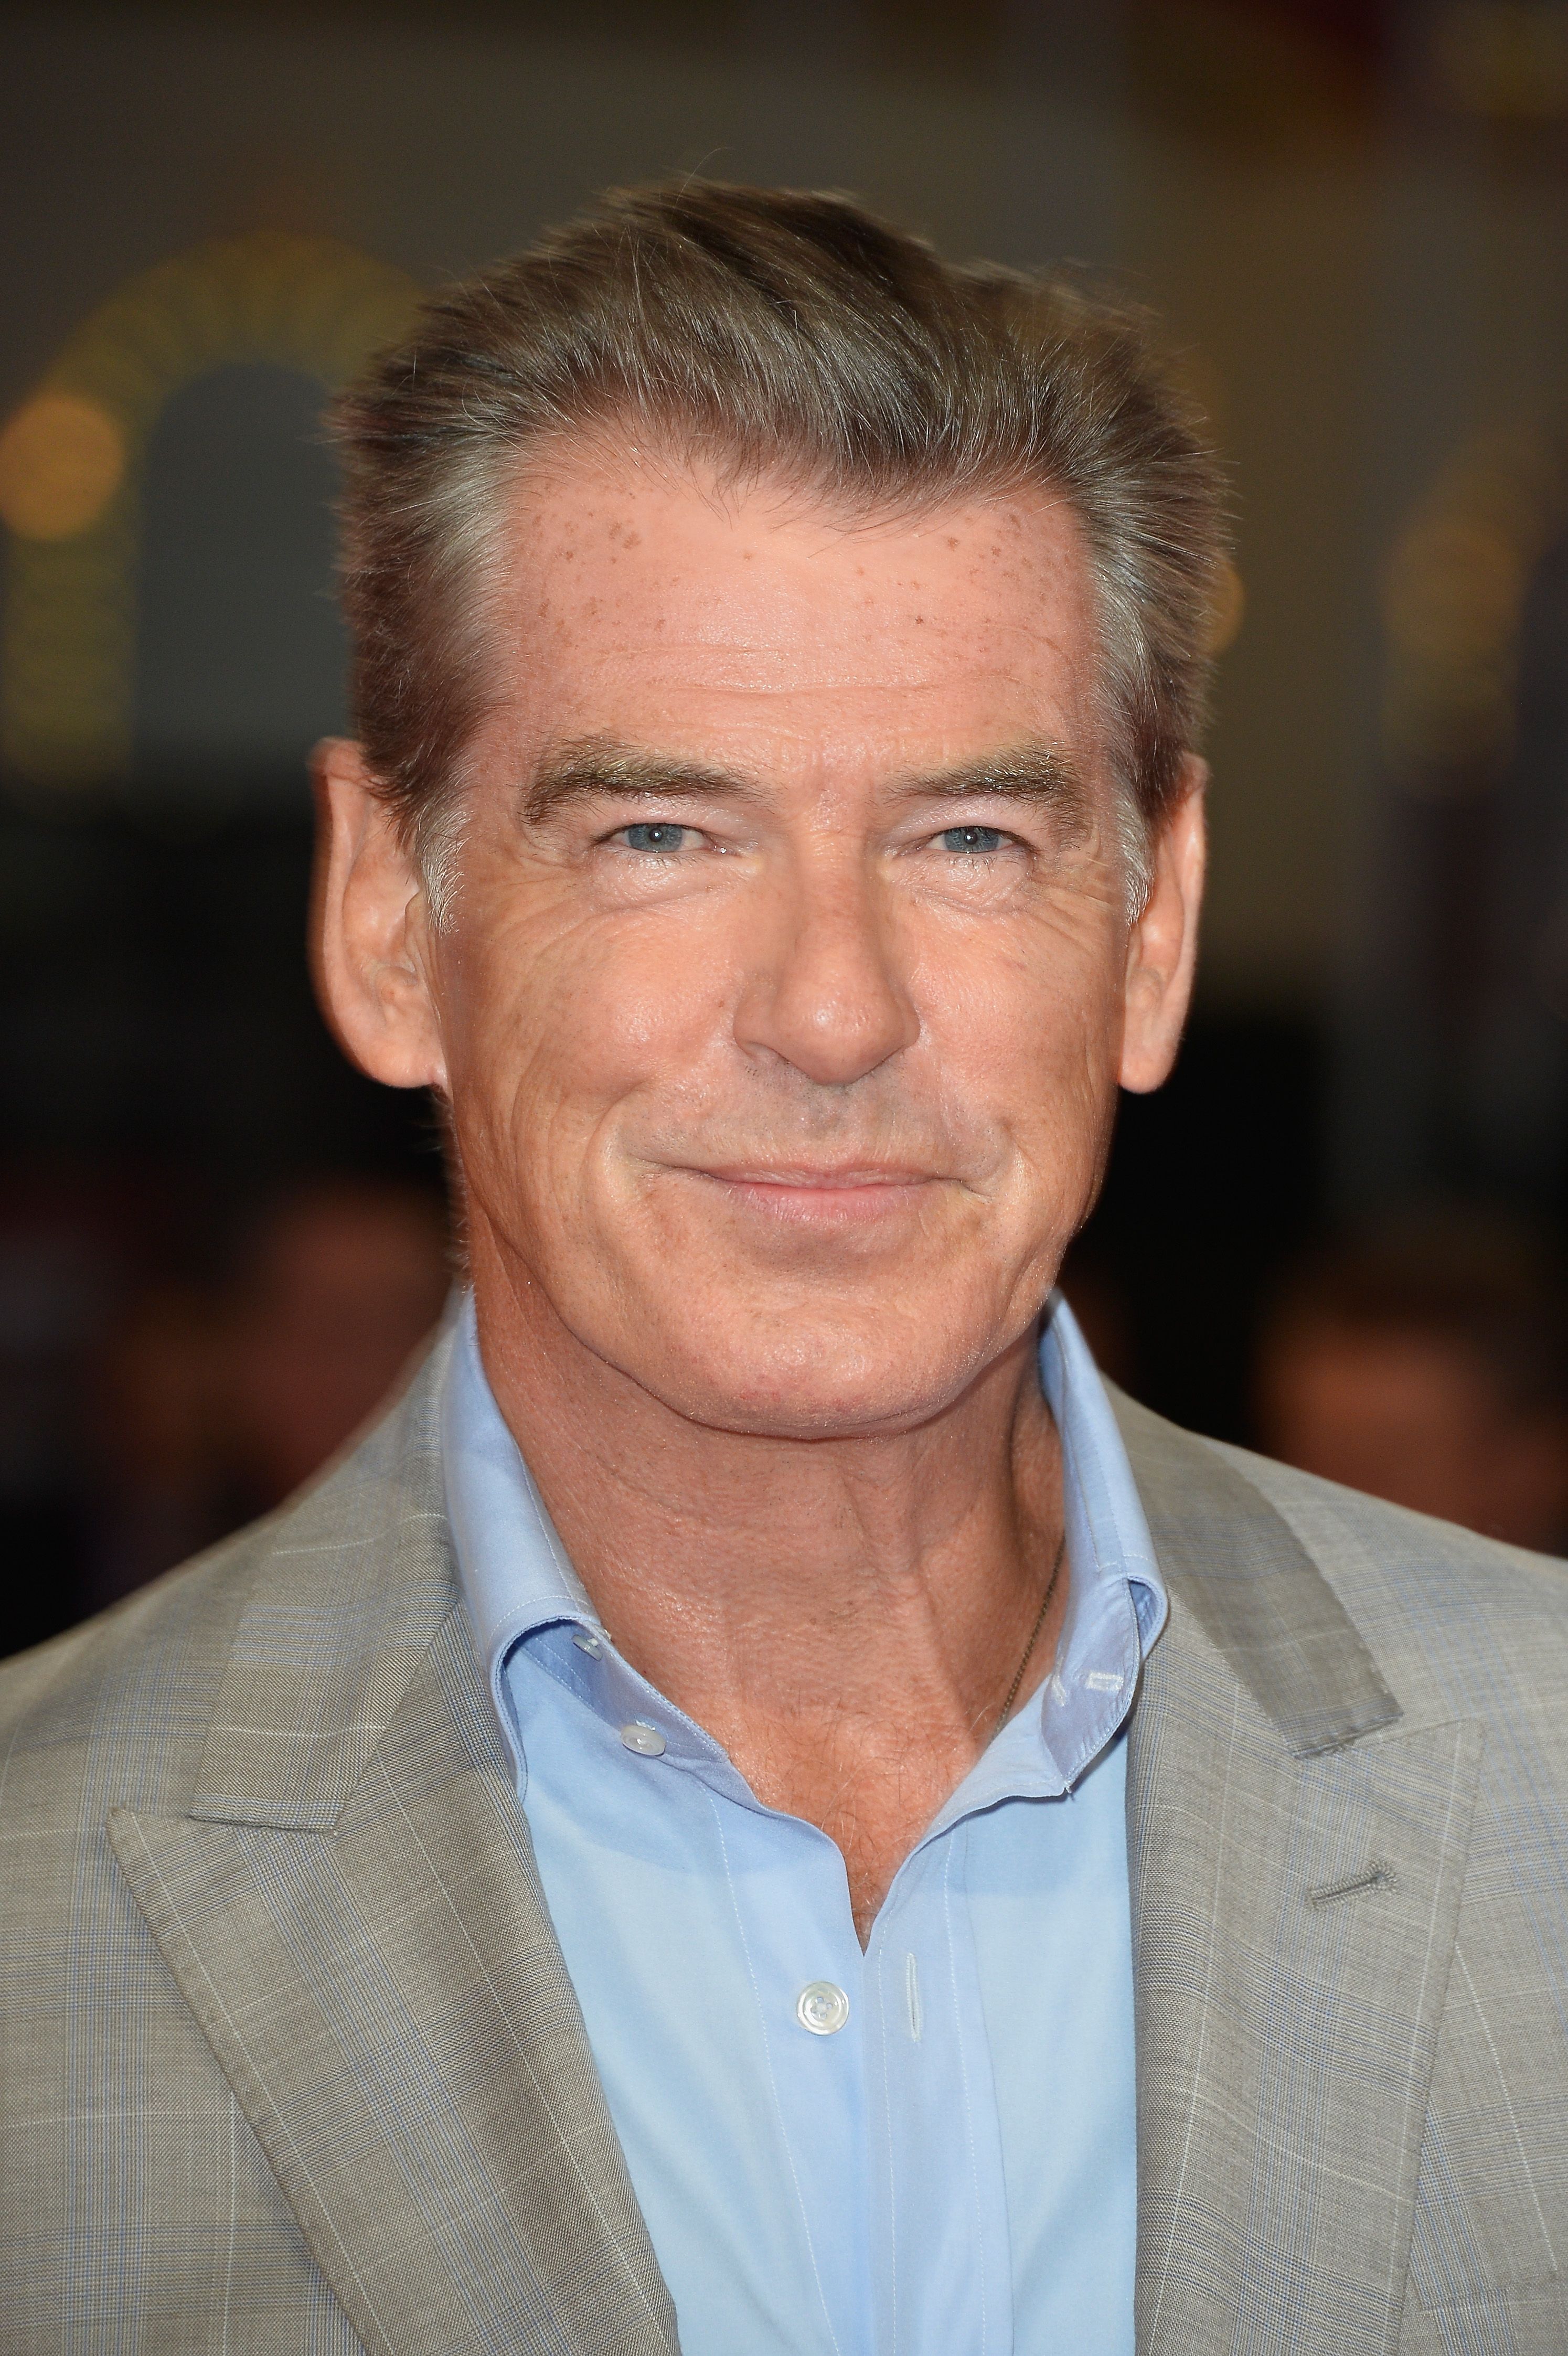 Pierce Brosnam during the 'Pasolini' premiere on September 11, 2014 in Deauville, France. | Source: Getty Images